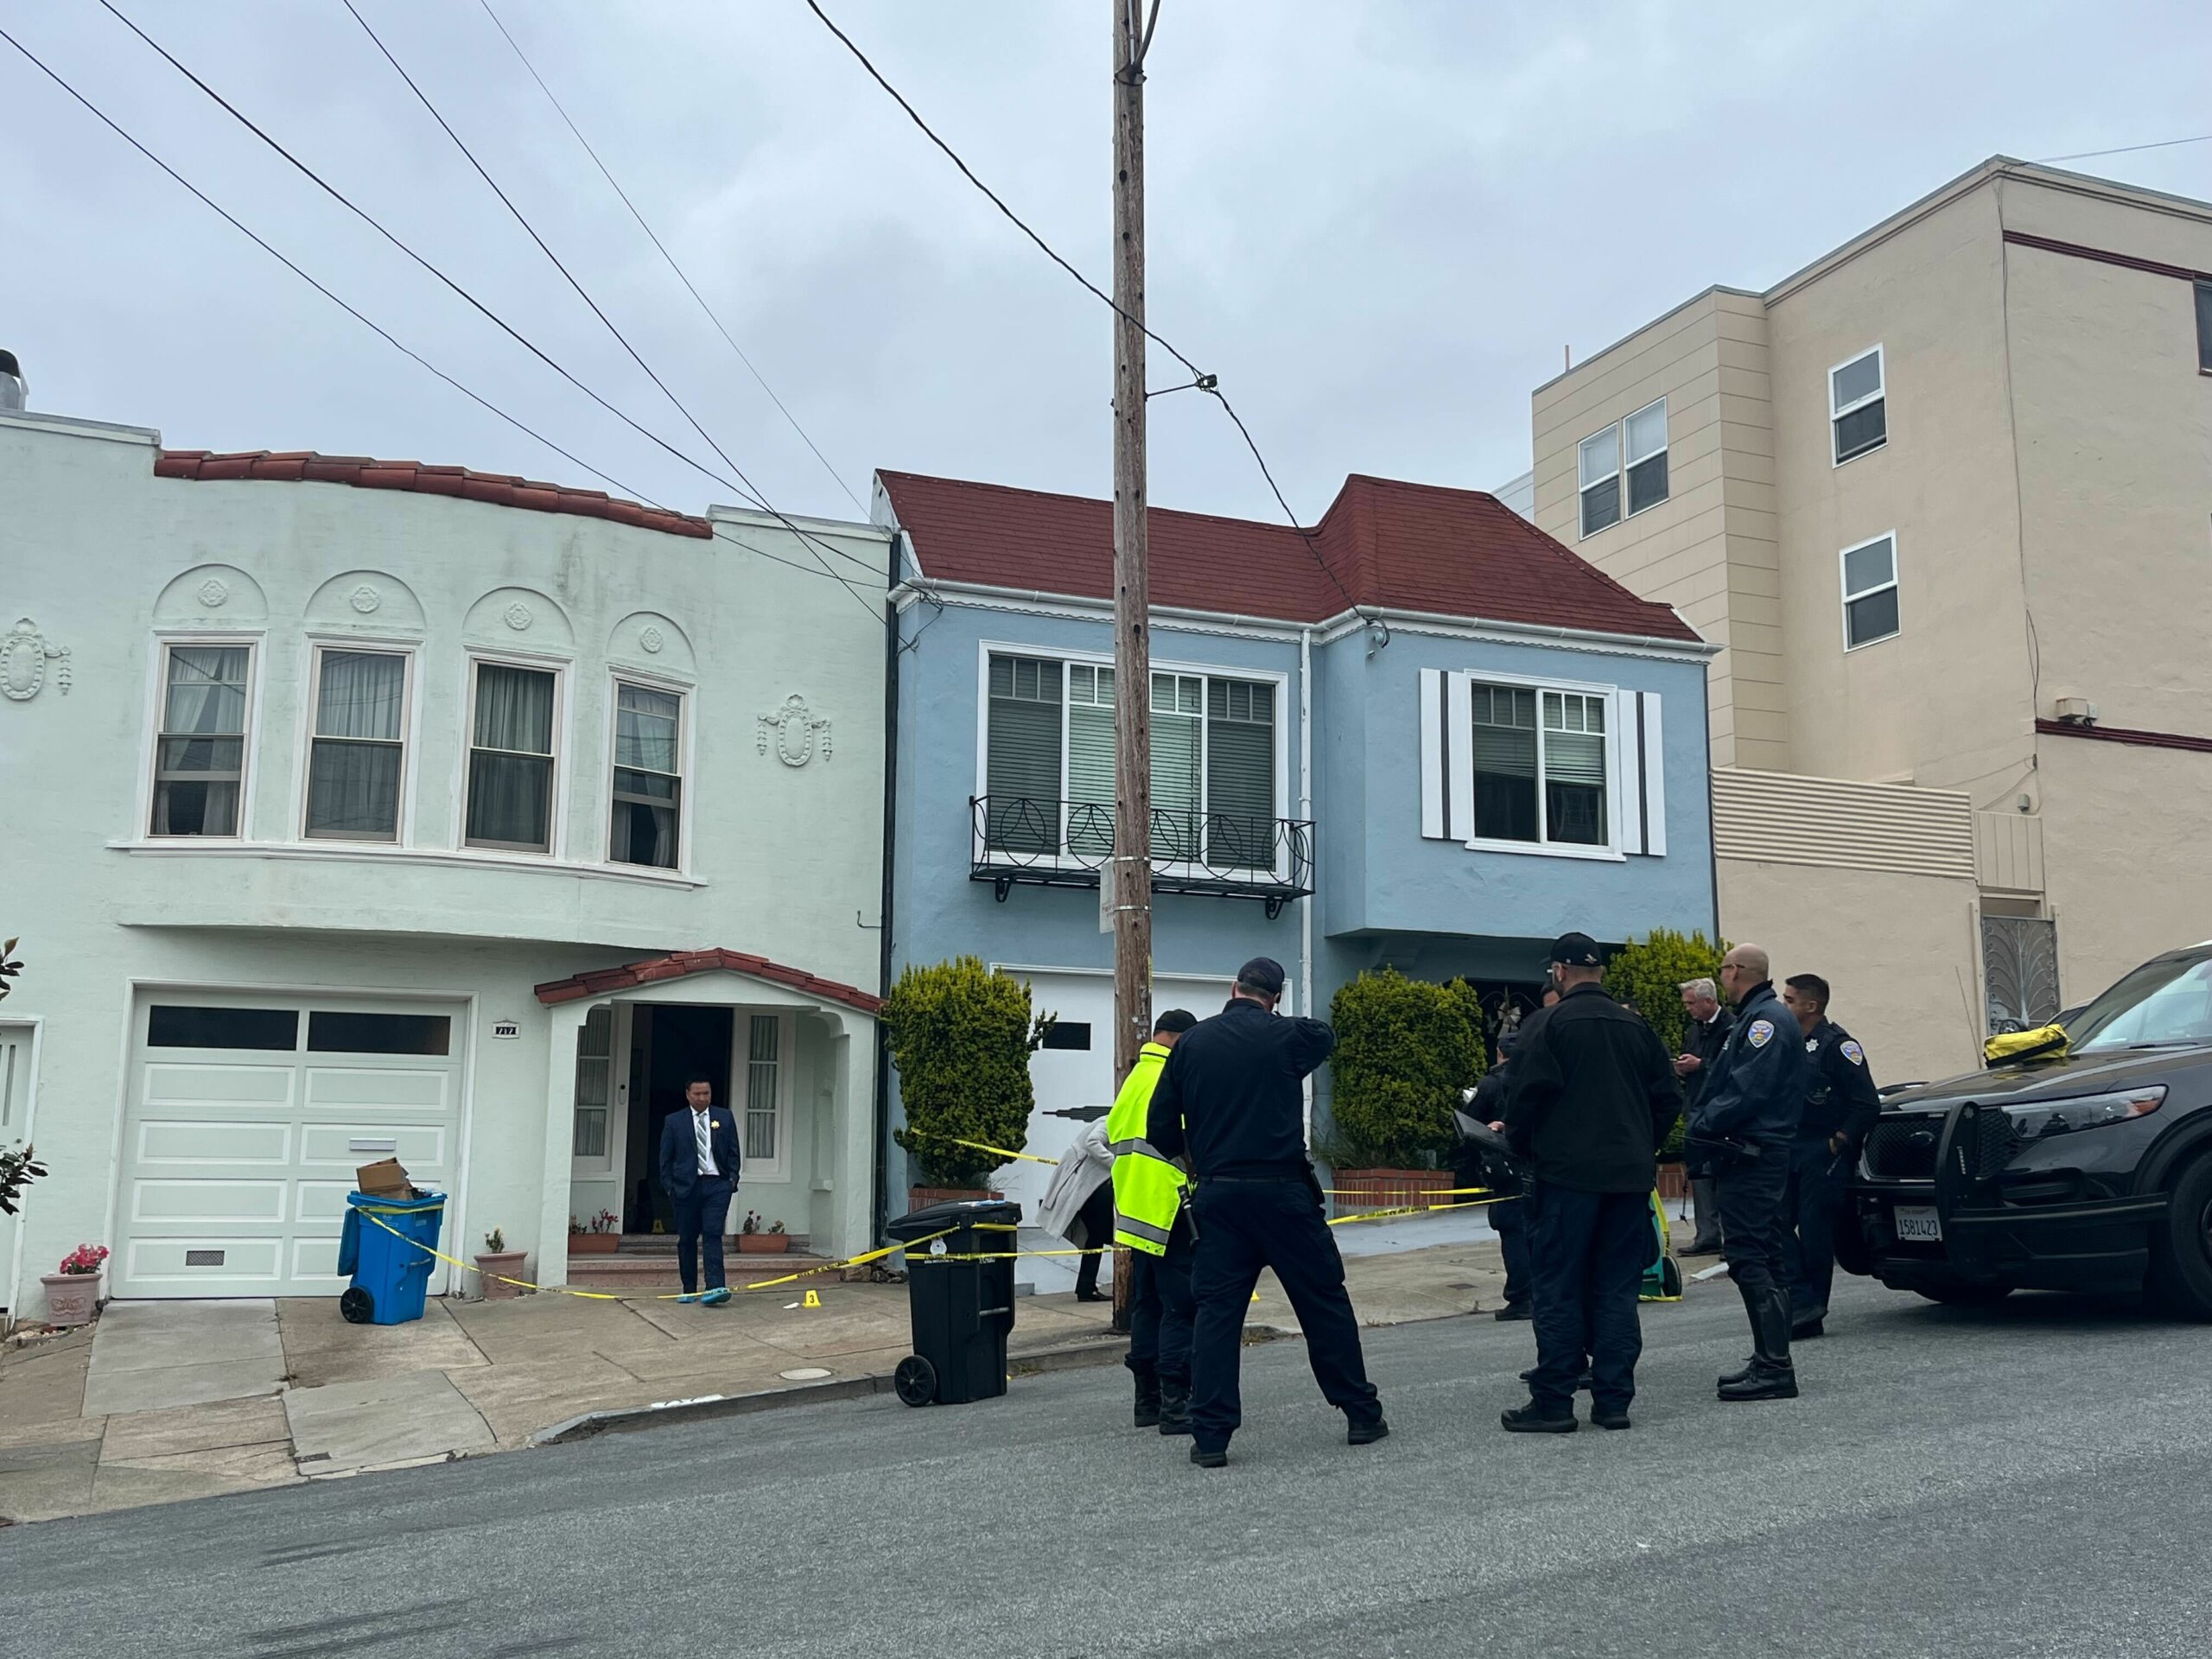 Police Shoot Armed Man at San Francisco Home, Find Dead Woman and Dog